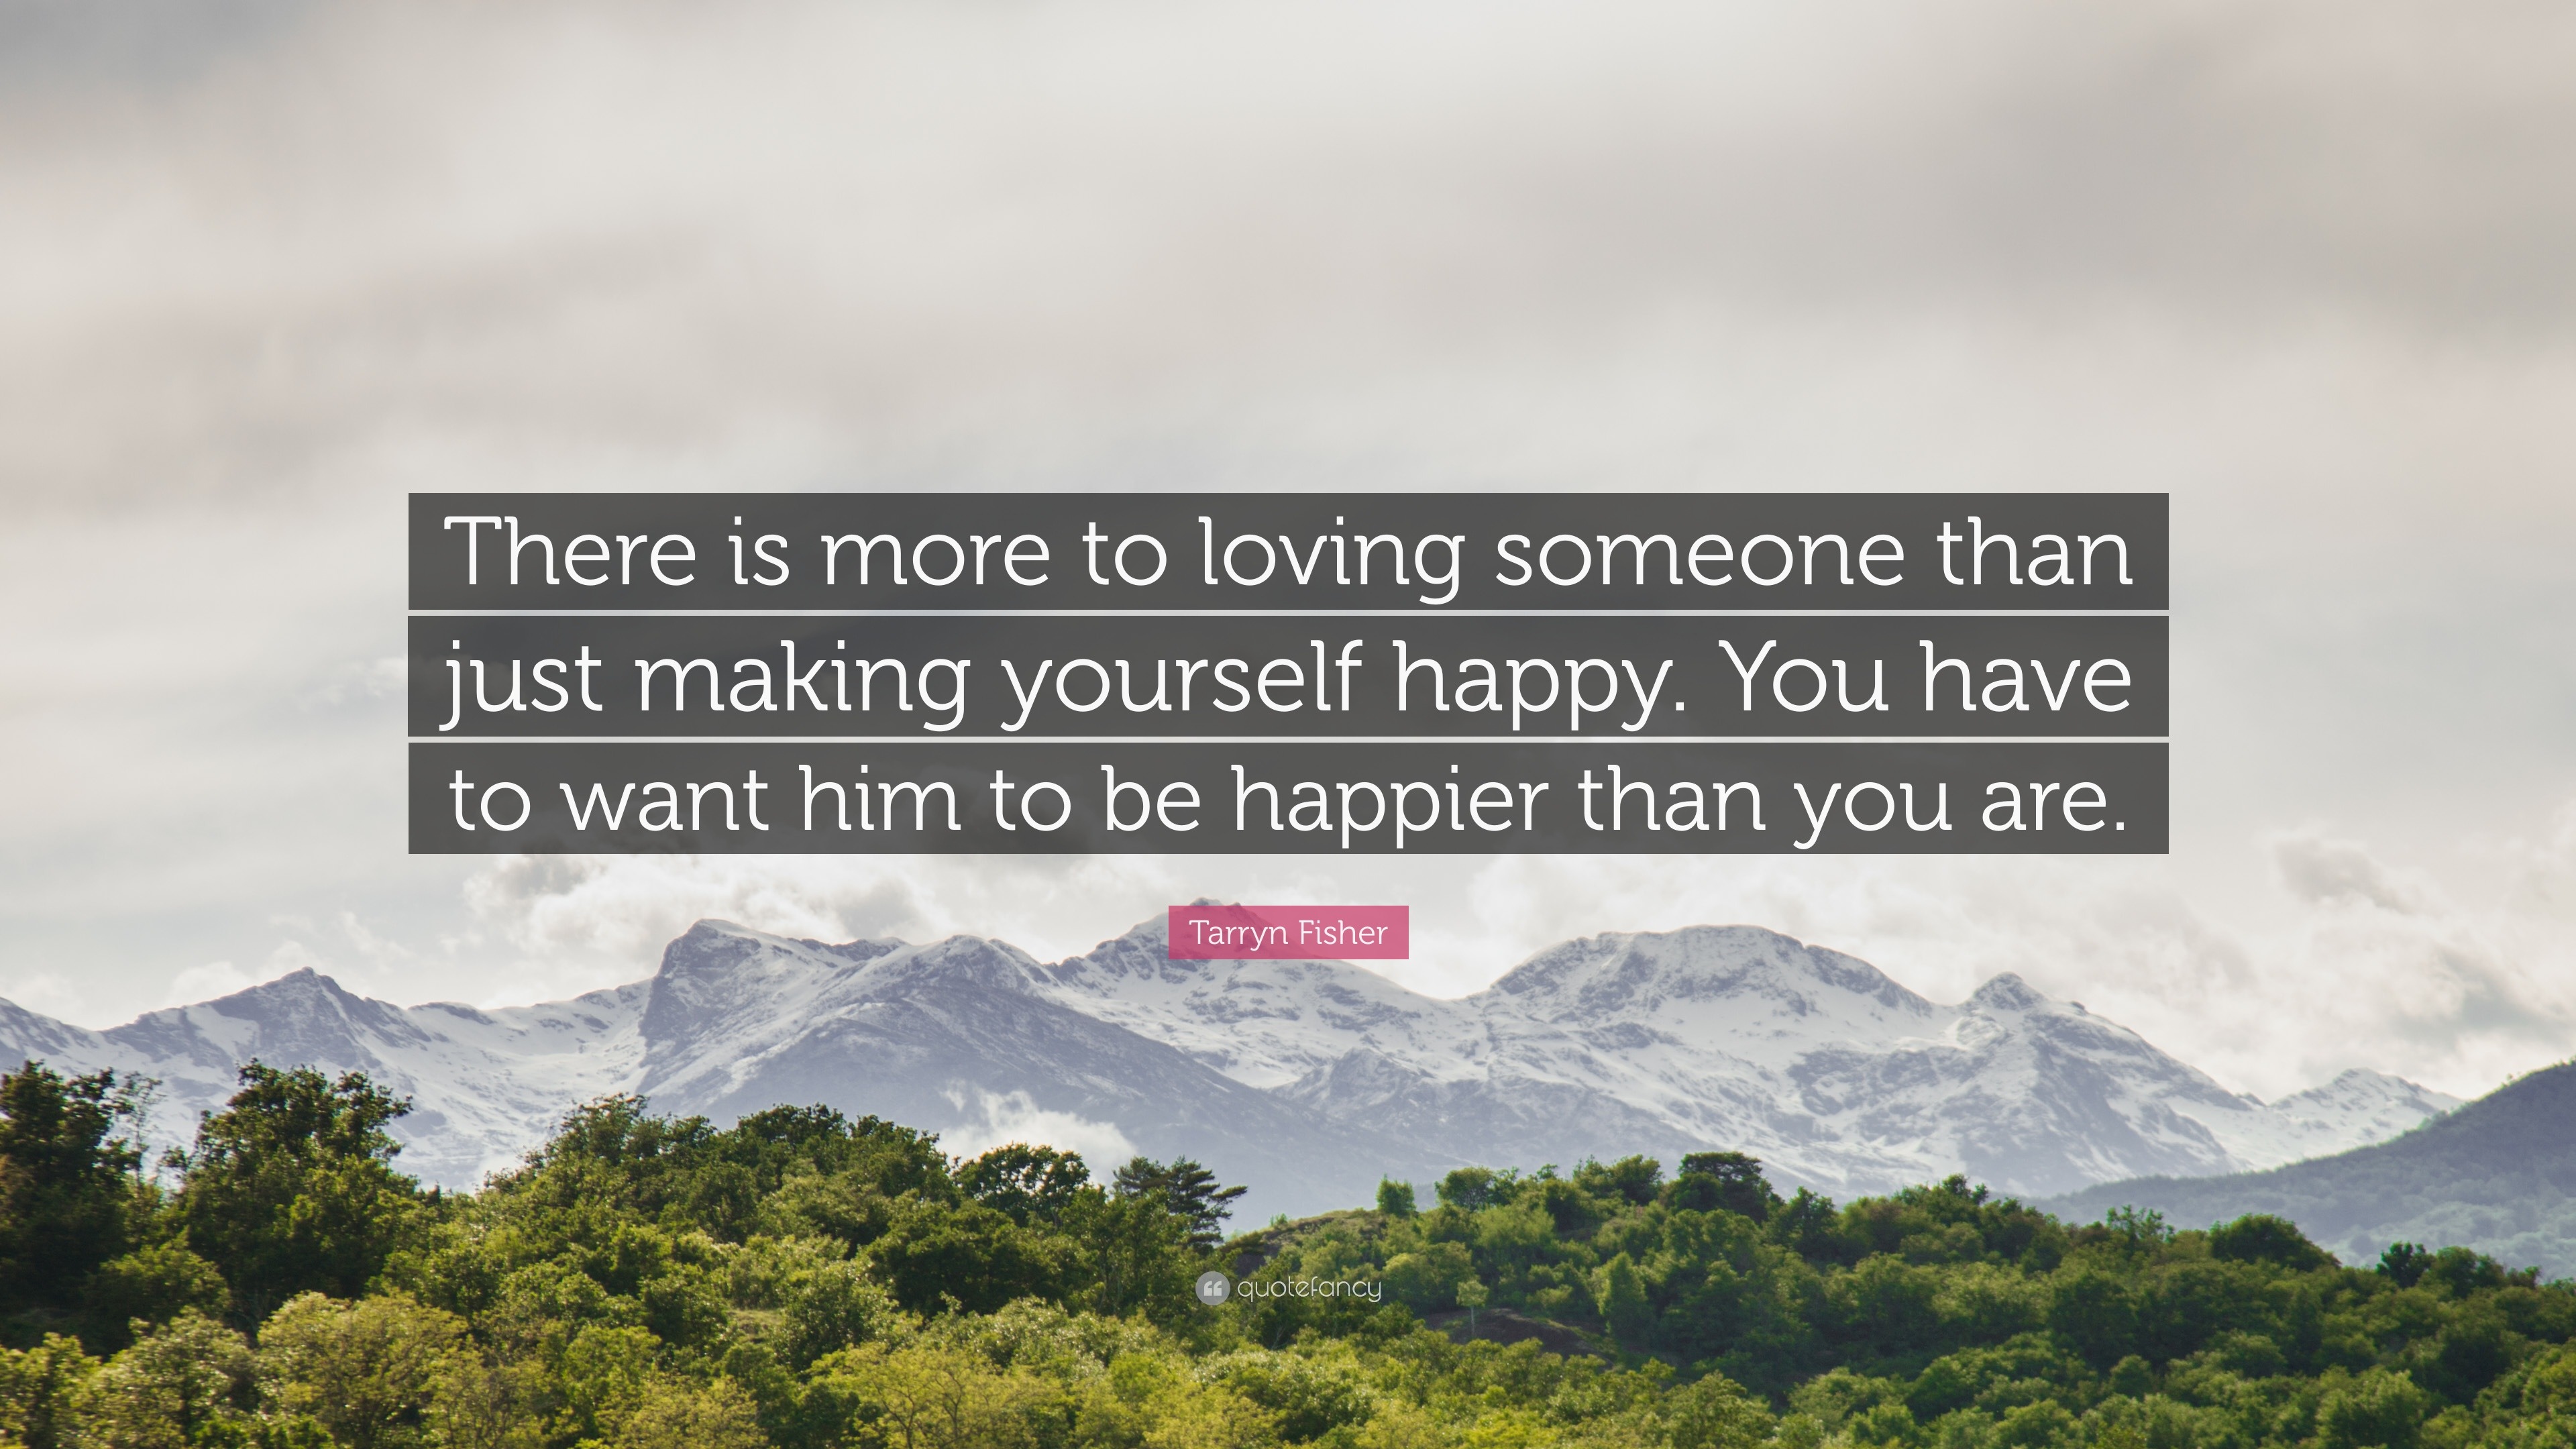 Tarryn Fisher Quote “There is more to loving someone than just making yourself happy